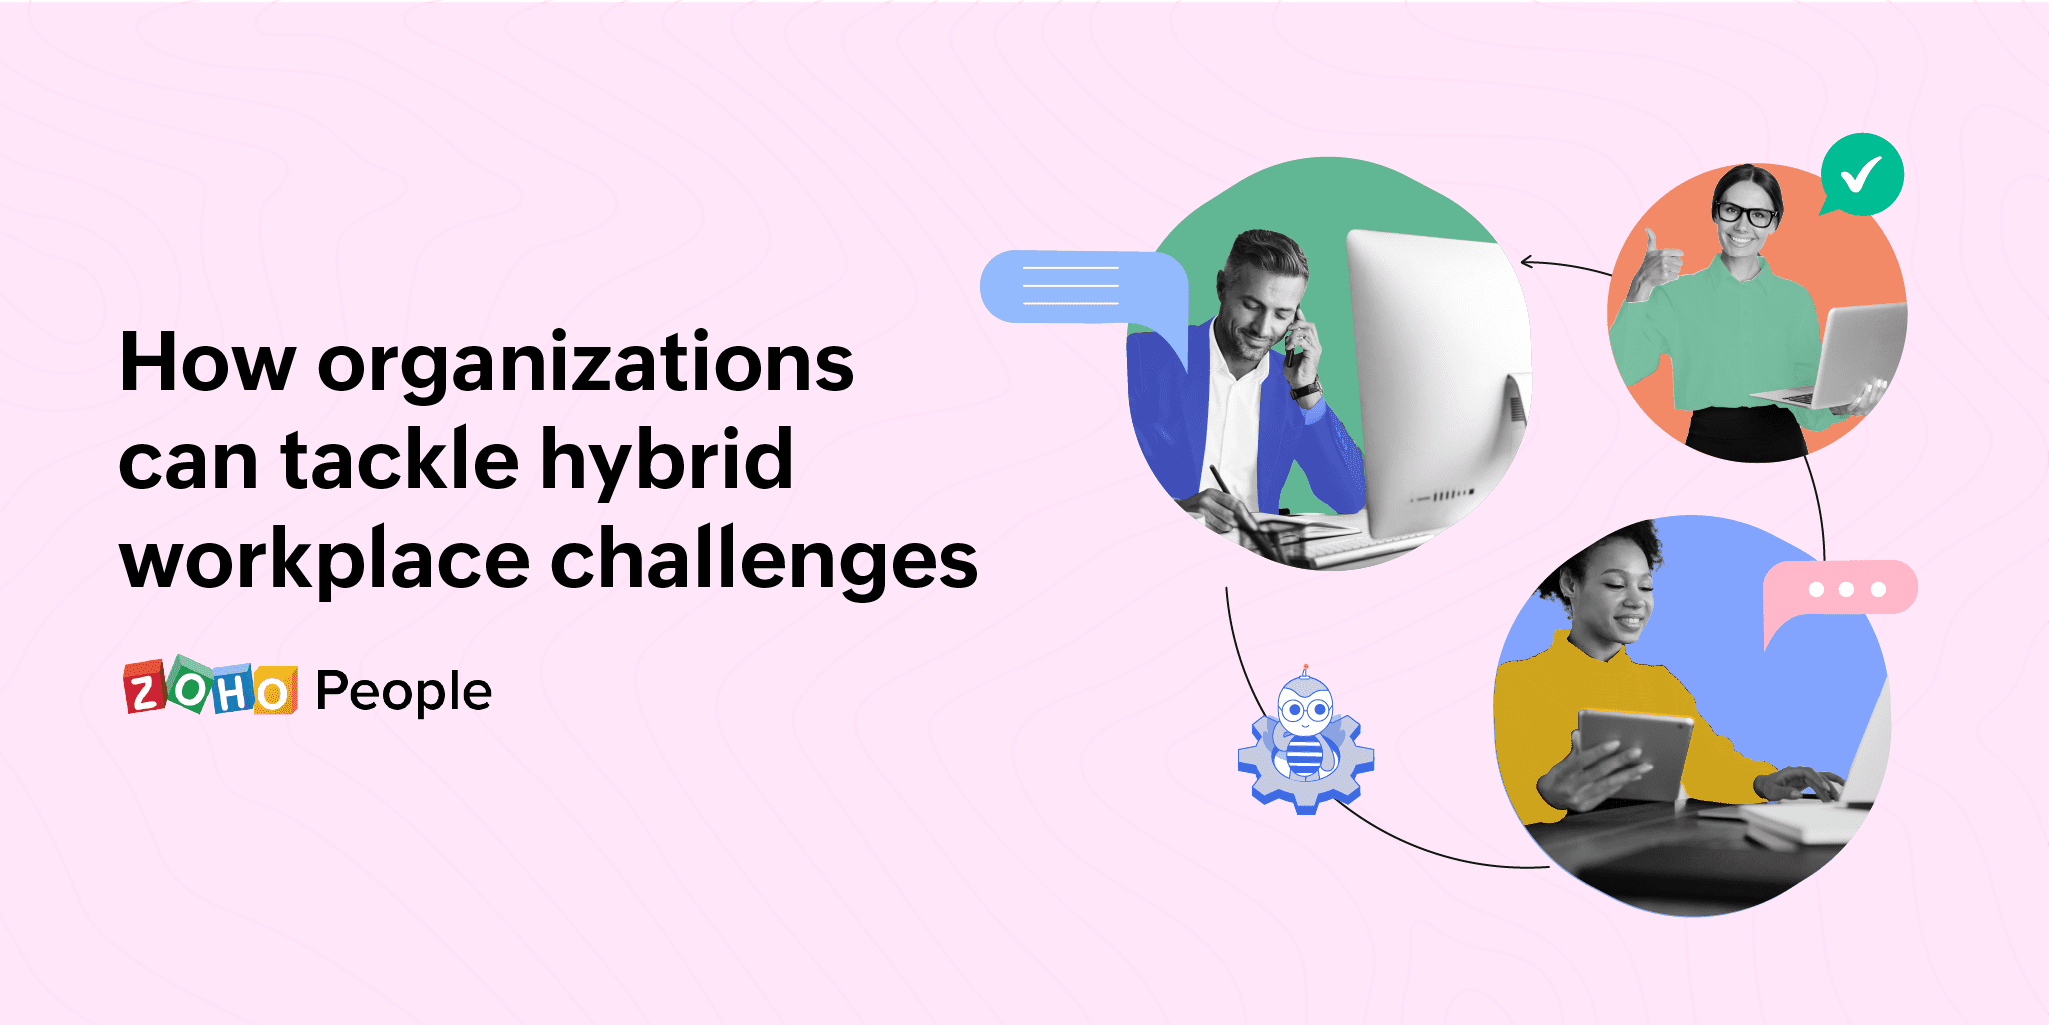 Challenges associated with Hybrid Workplace Model